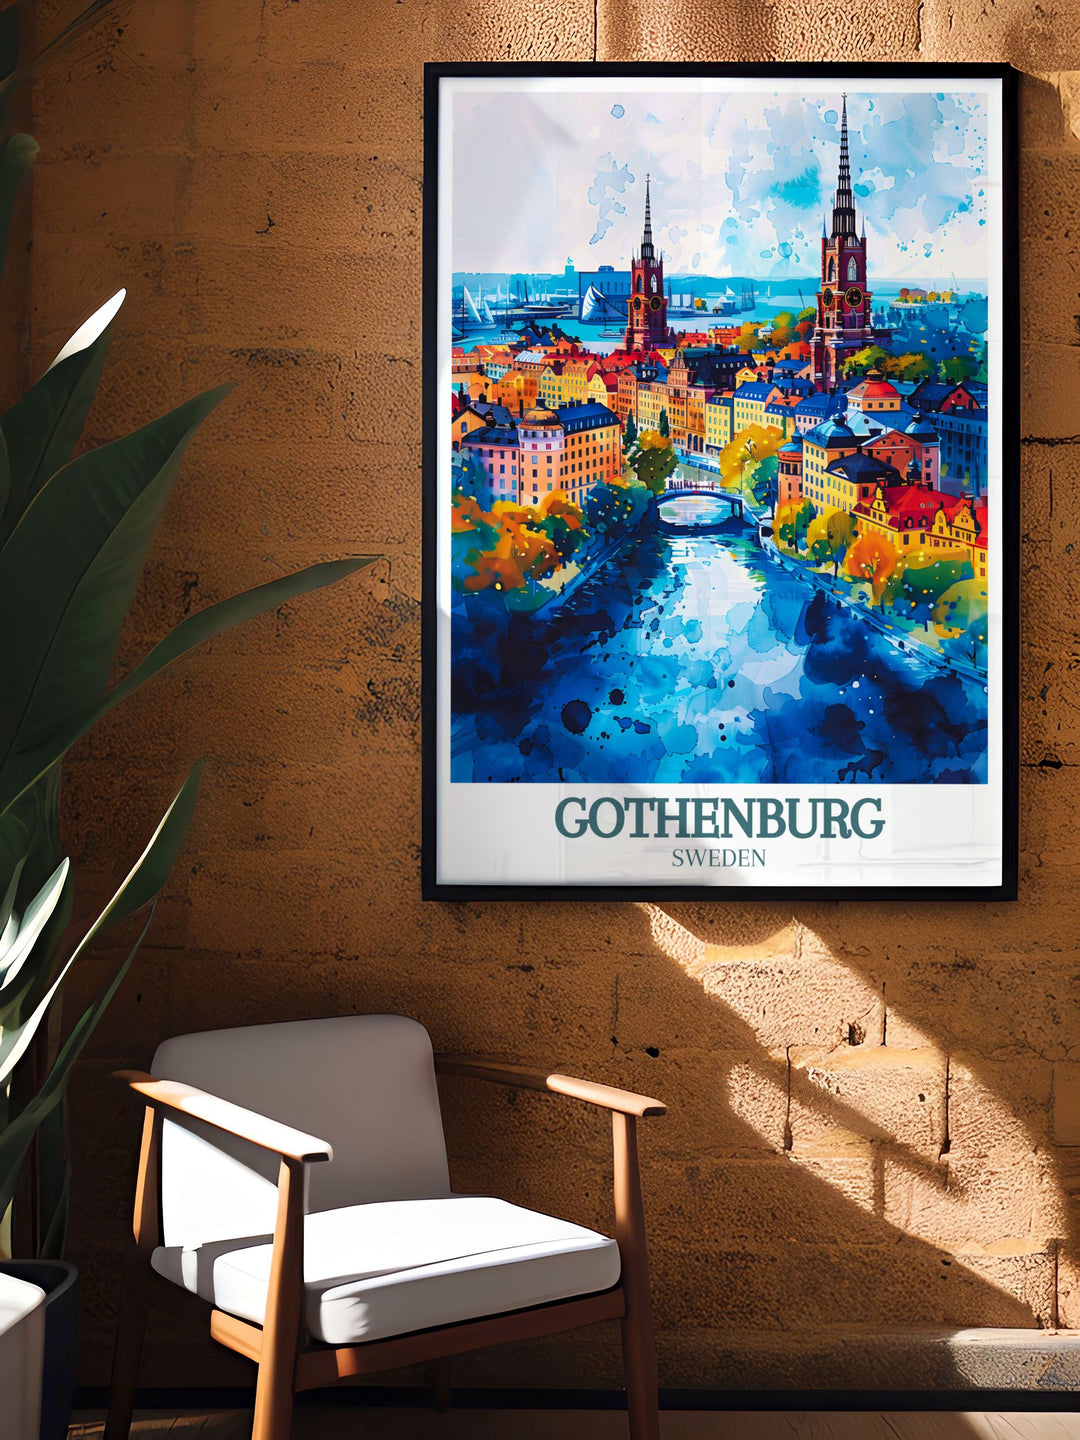 Showcasing the tranquil charm of Gothenburgs canals, this poster highlights the citys serene waterways and lush greenery. Ideal for urban explorers and nature lovers, this artwork brings a touch of Swedish elegance to your home decor.